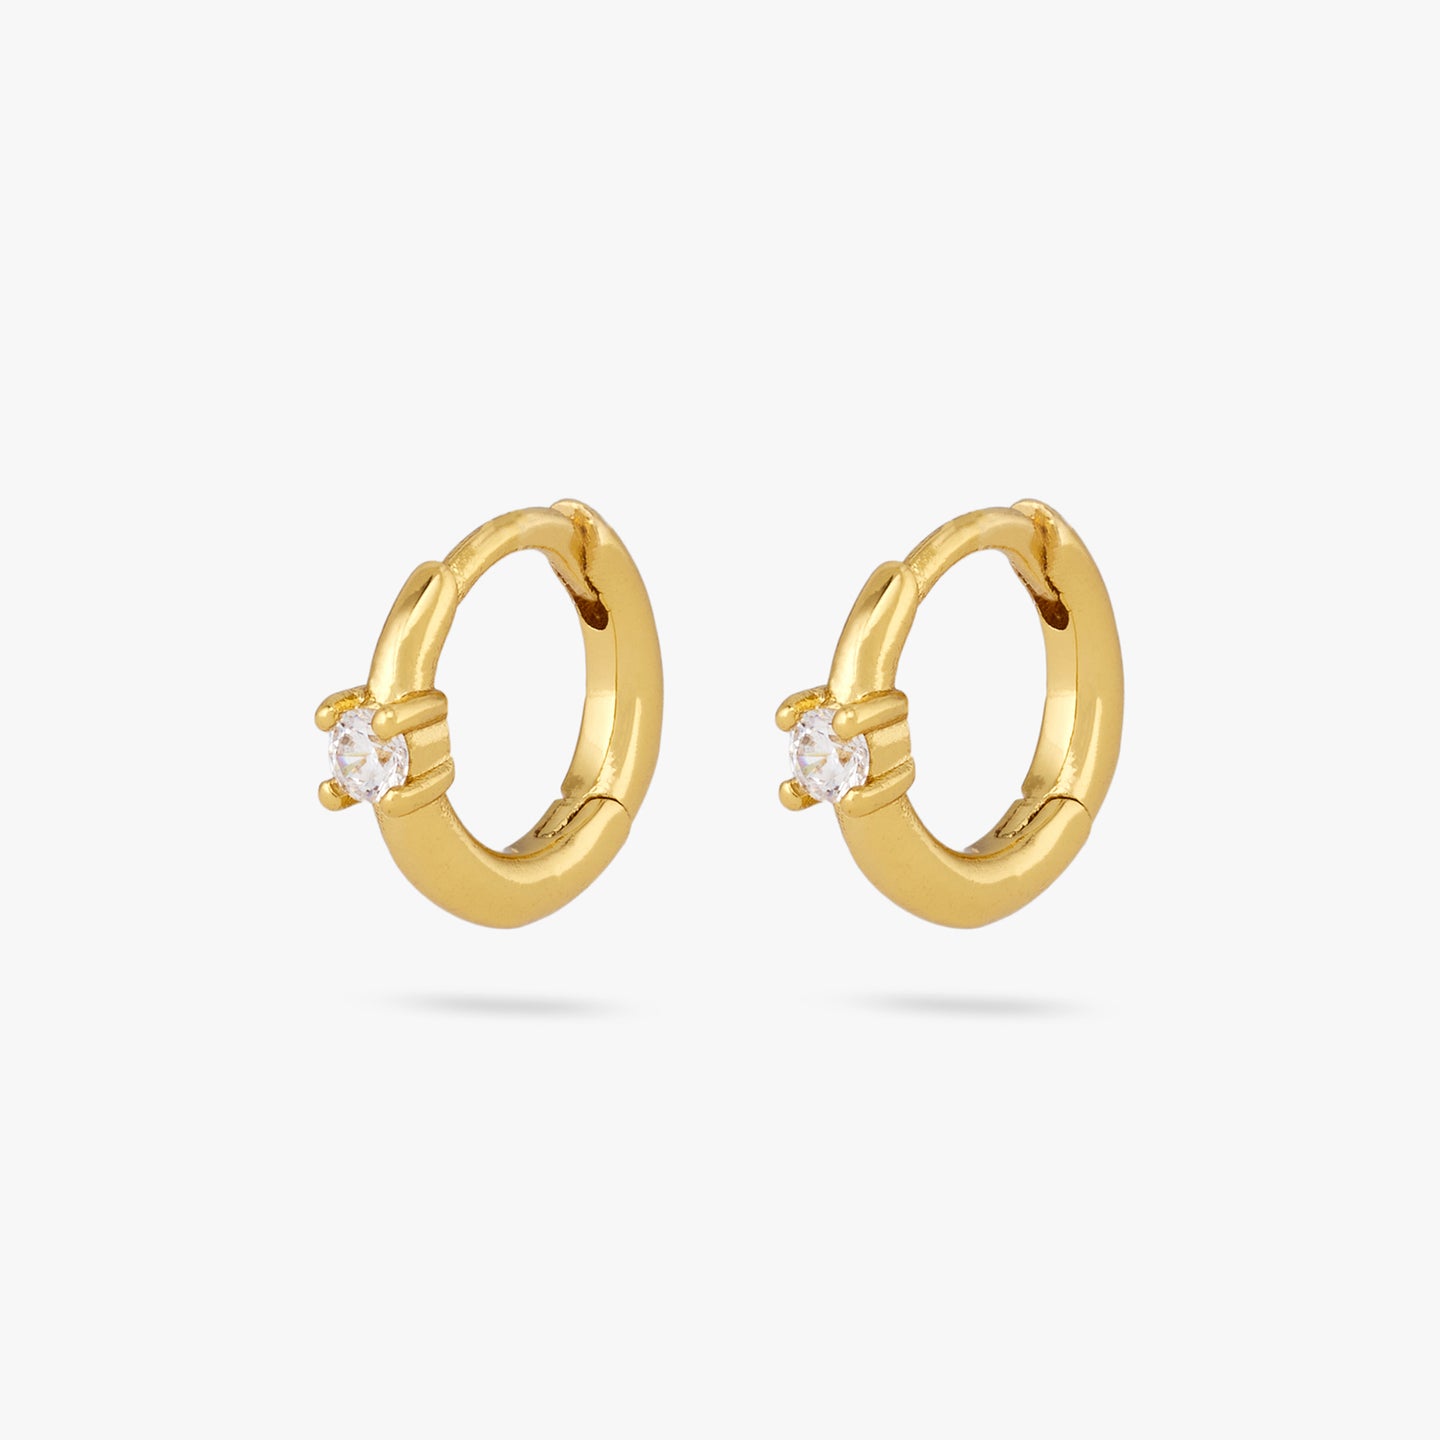 This is a pair of small gold huggies with a clear cz detail in the center of the front [pair] color:null|gold/clear